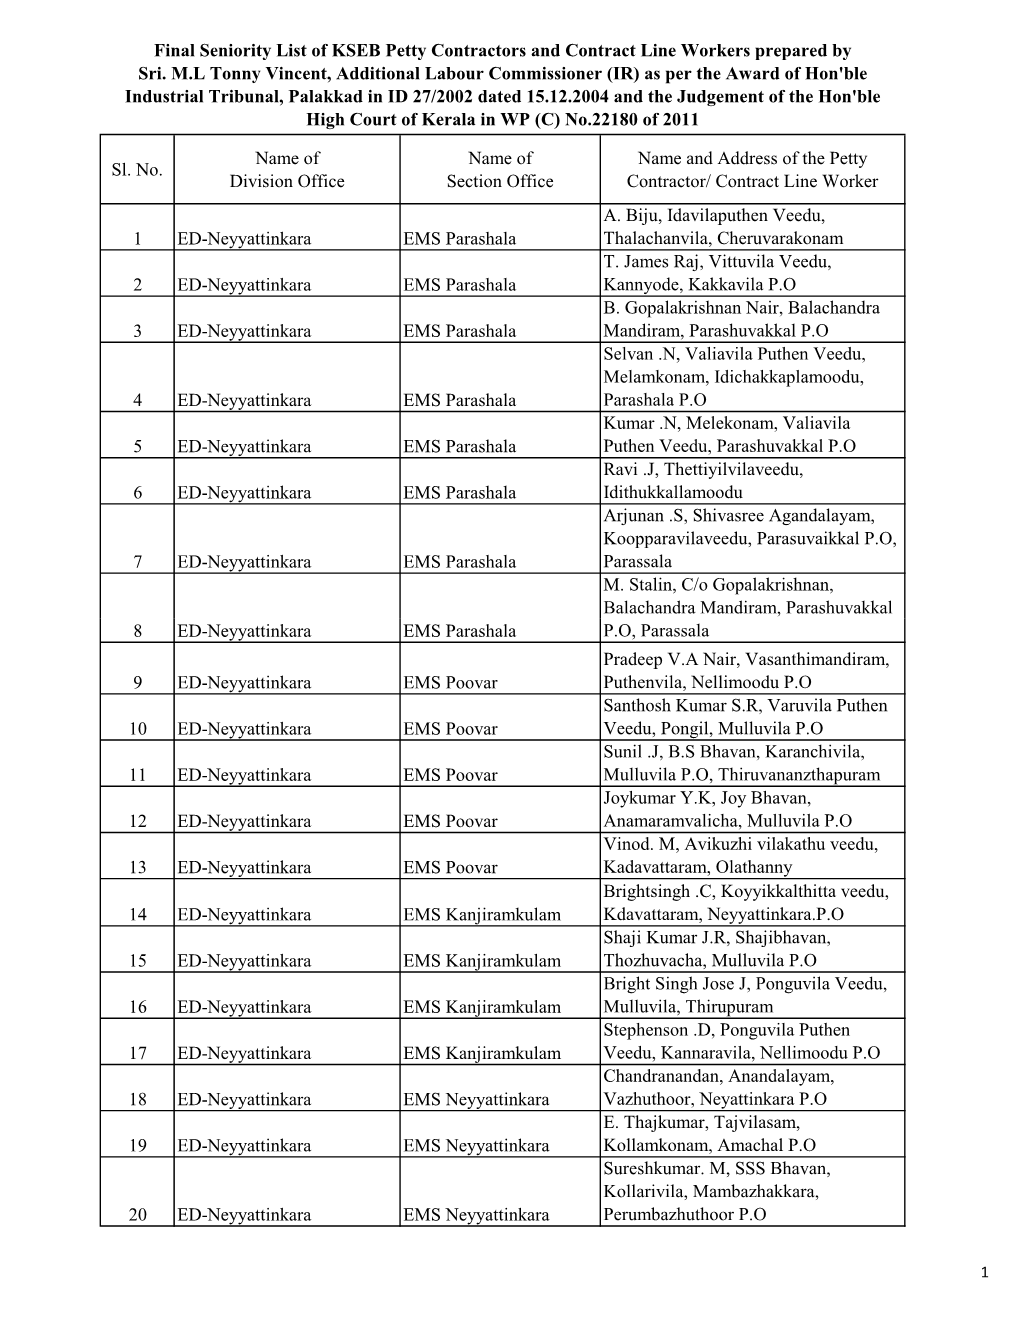 Final Seniority List of KSEB Petty Contractors and Contract Line Workers Prepared by Sri